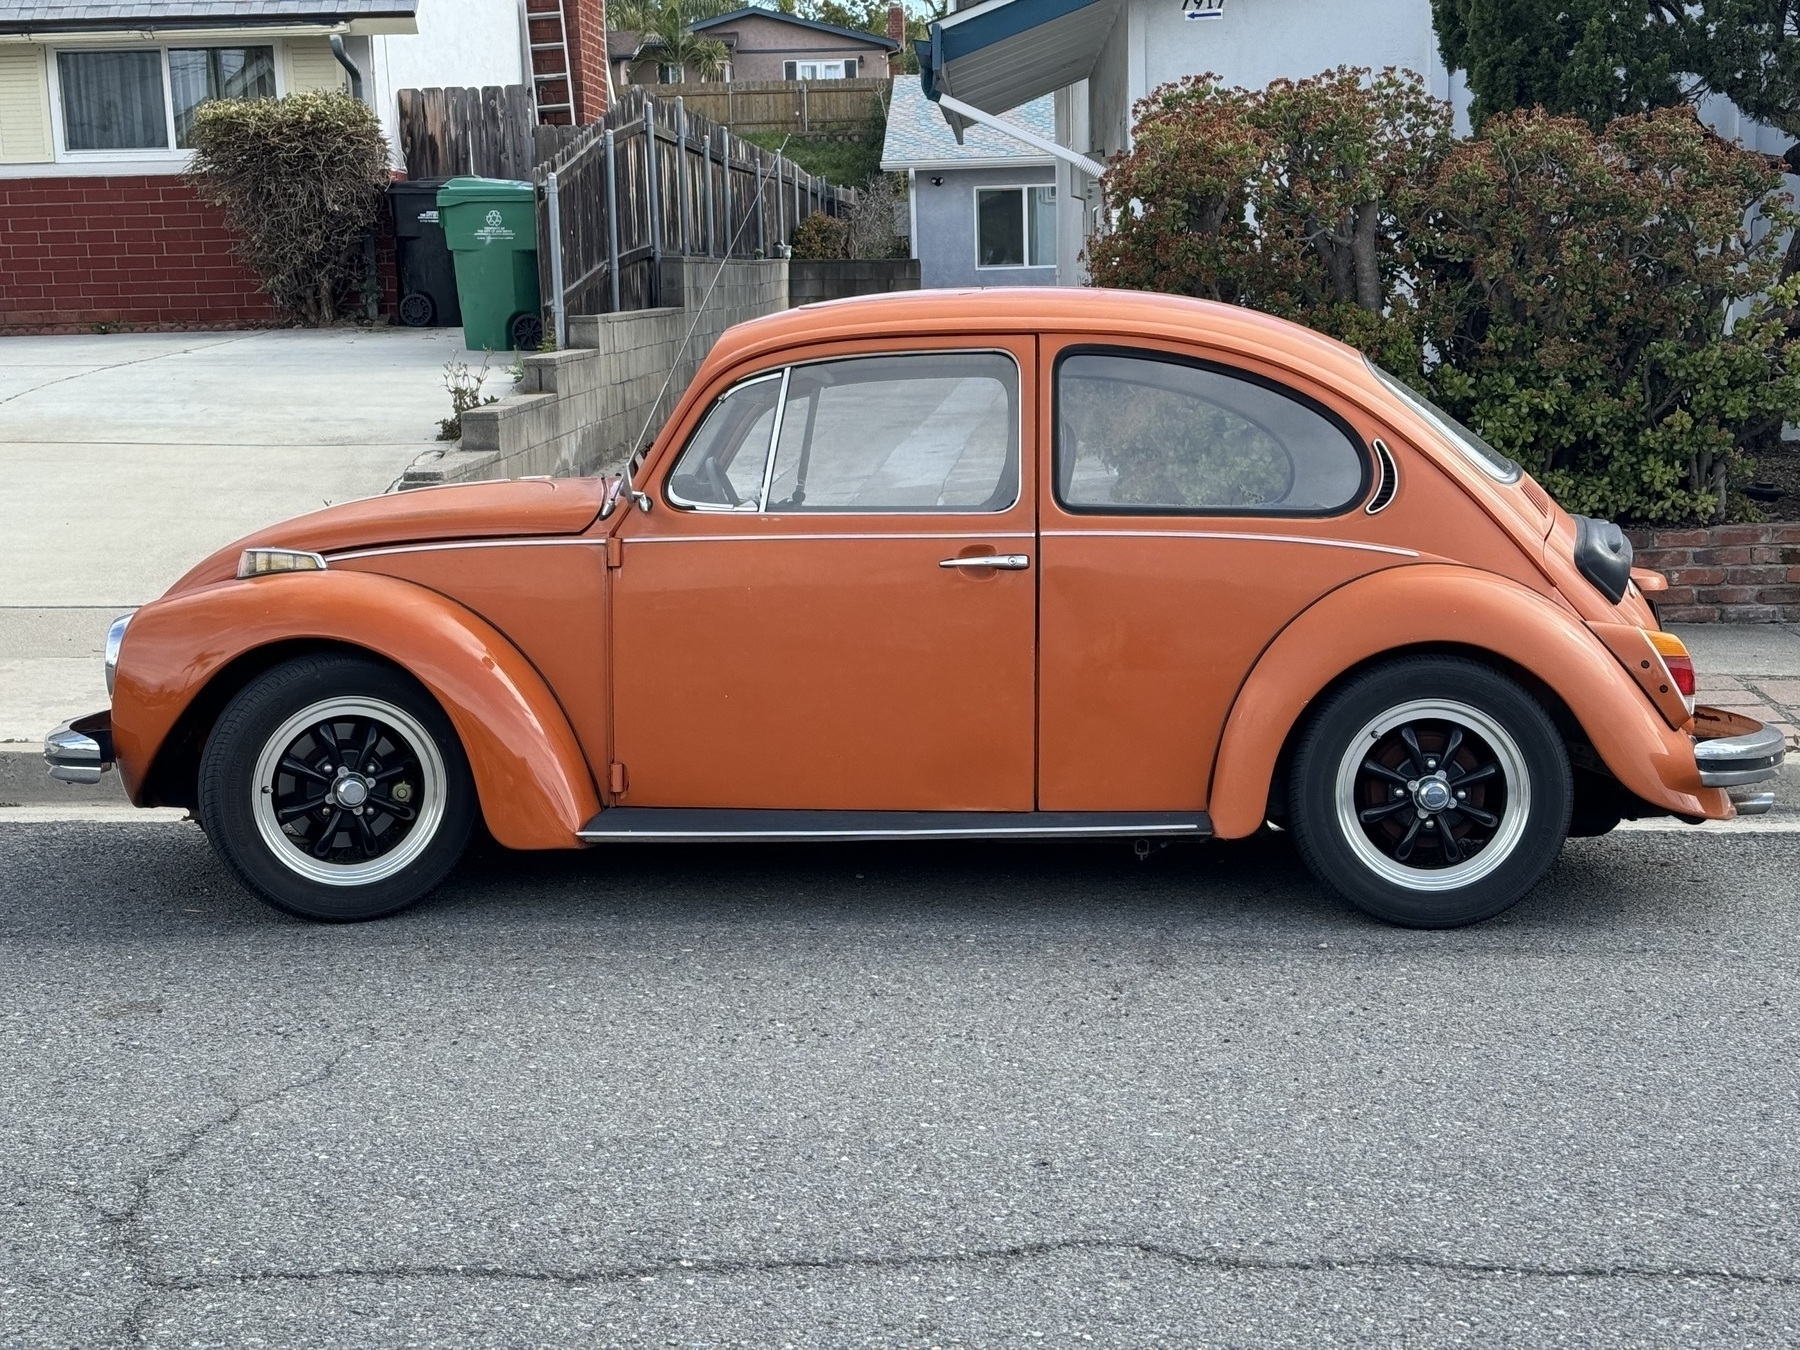 Orange vintage Volkswagen Beetle, viewed side-on, nicely centered in the photo, parked in front of and between two suburban houses.